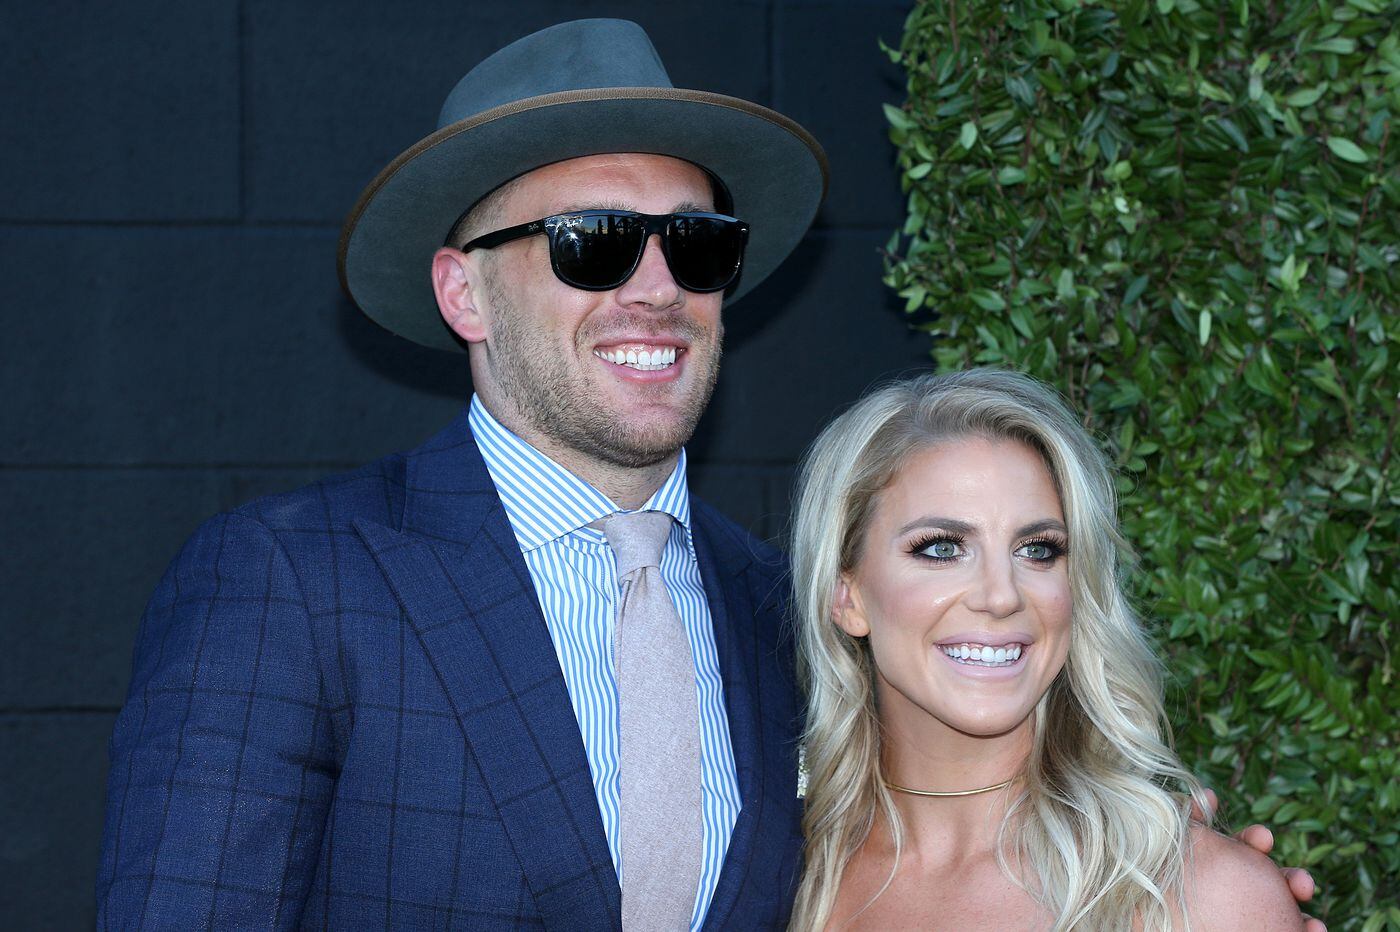 Julie Ertz Heads To World Cup As Uswnt Stalwart With Husband Zach